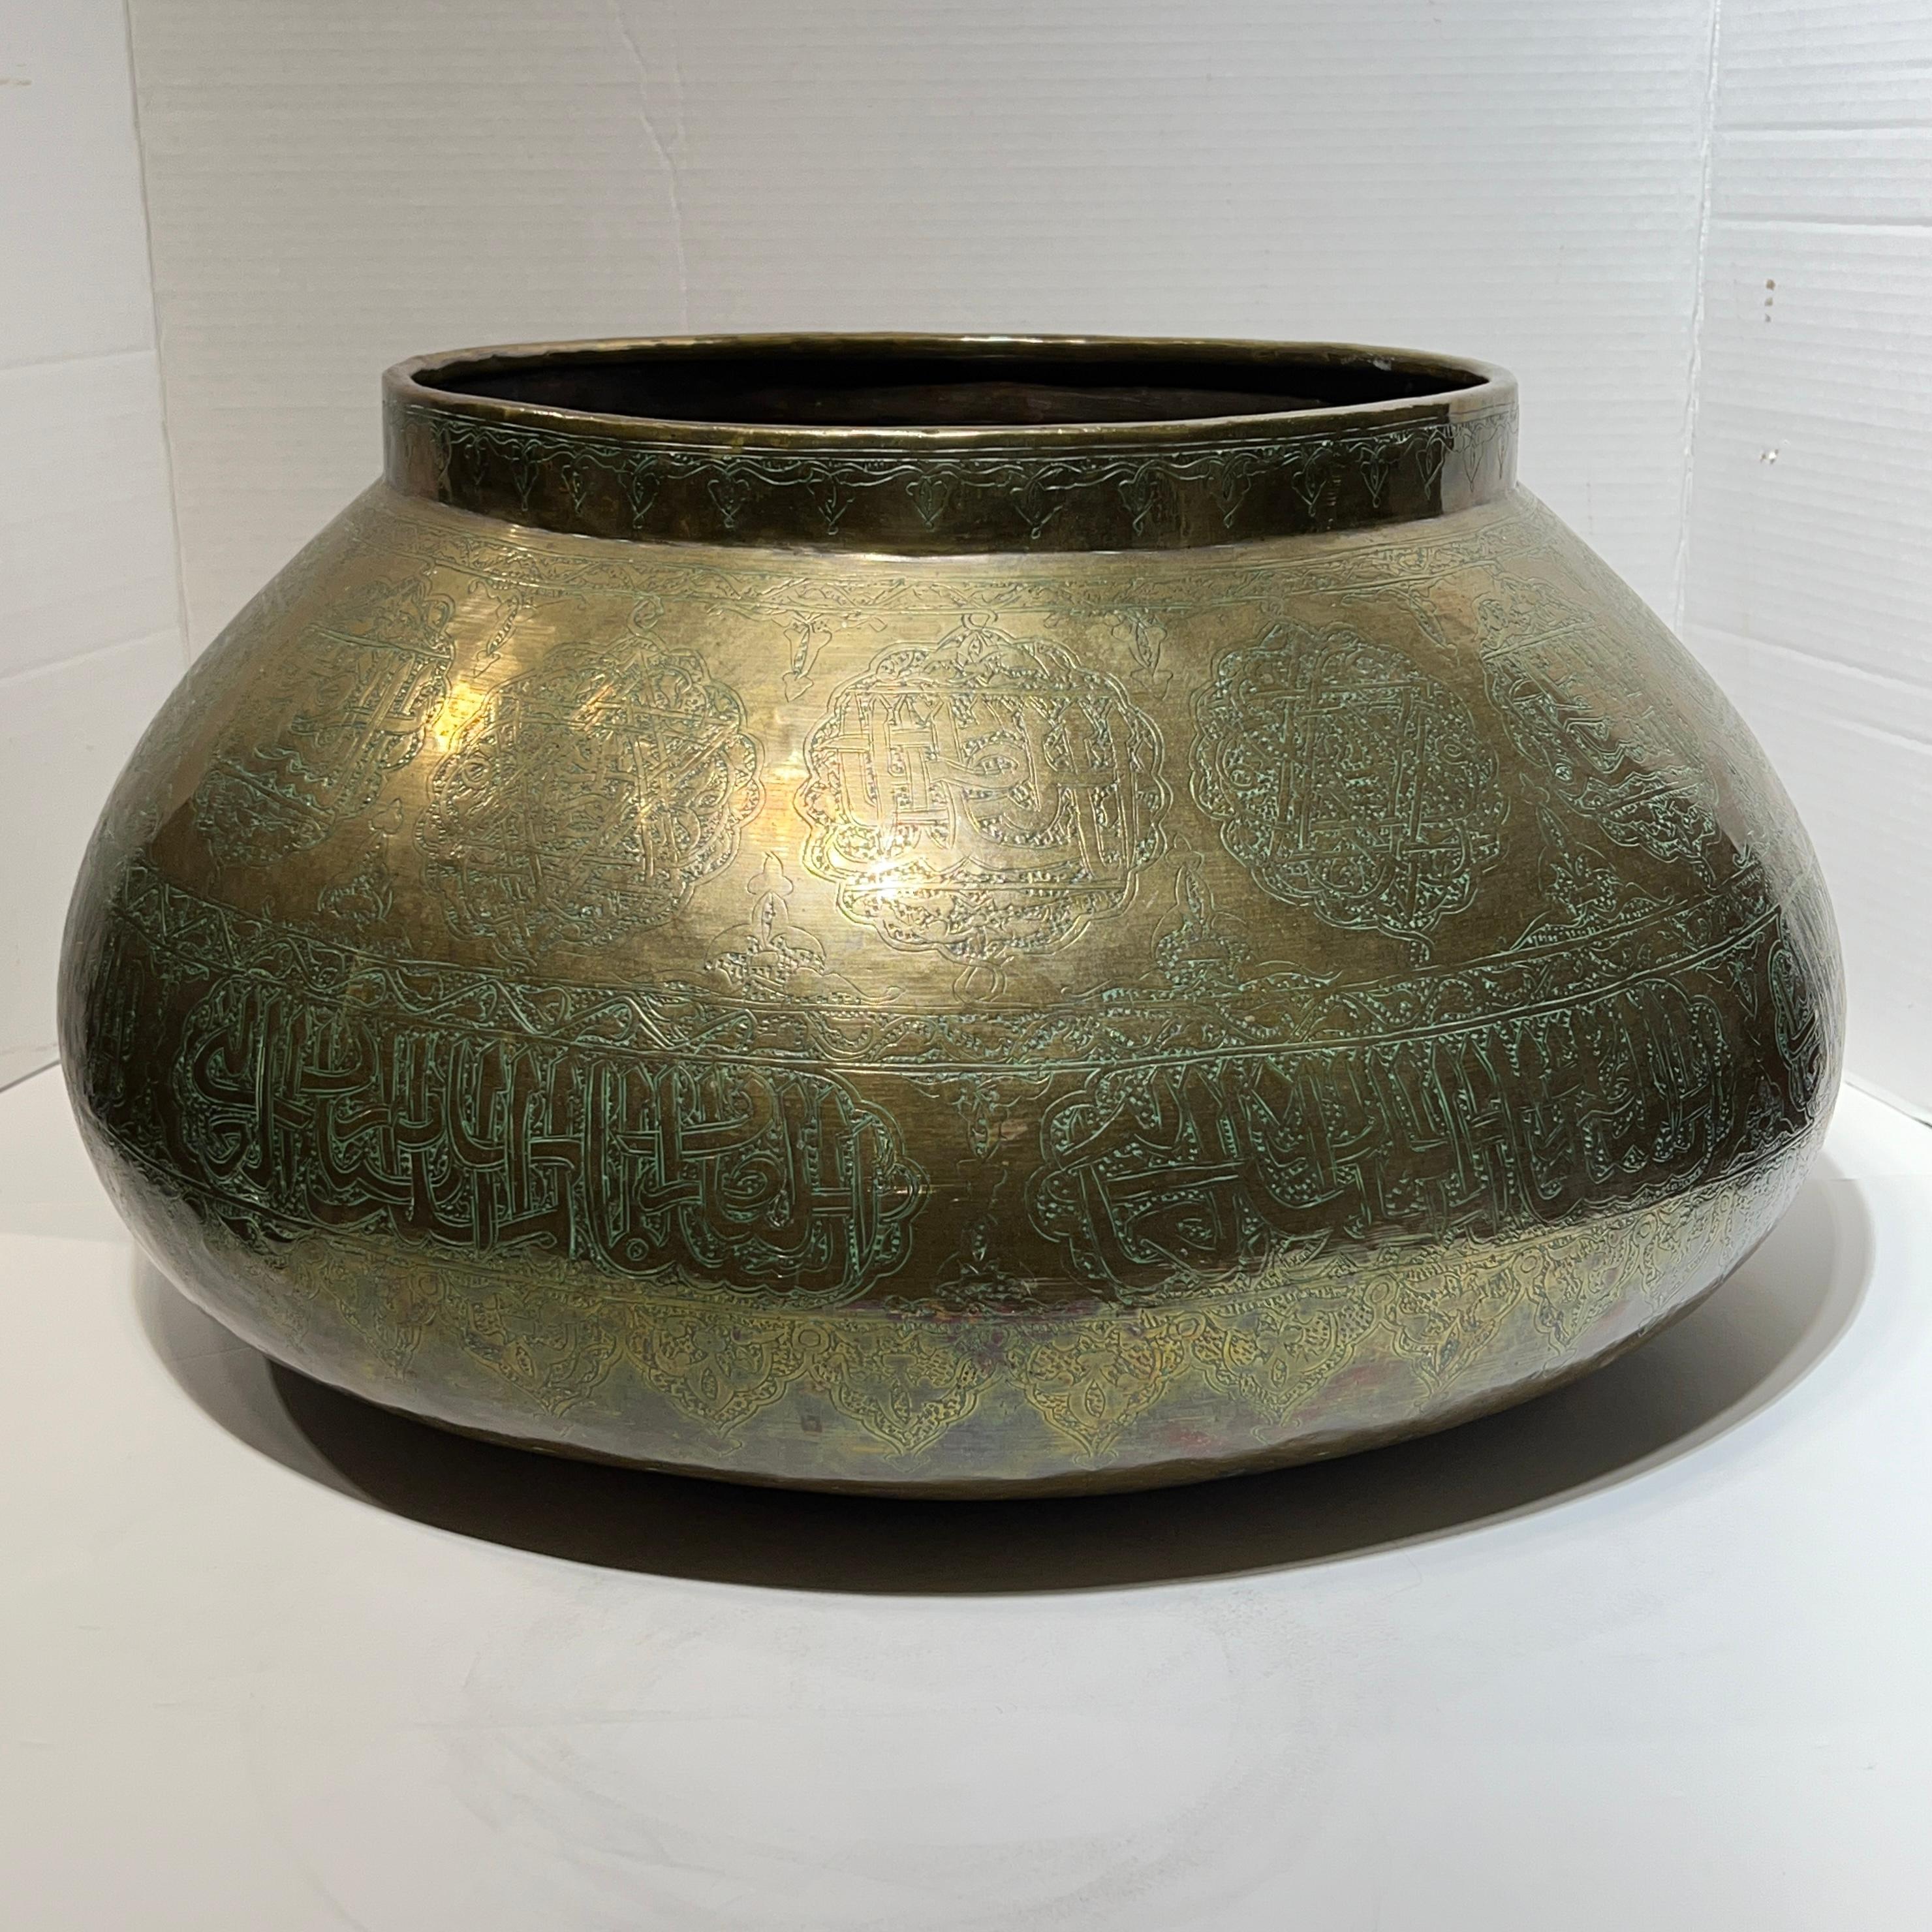 Large 19th Century Islamic Middle Eastern Engraved Brass Centerpiece Bowl For Sale 1